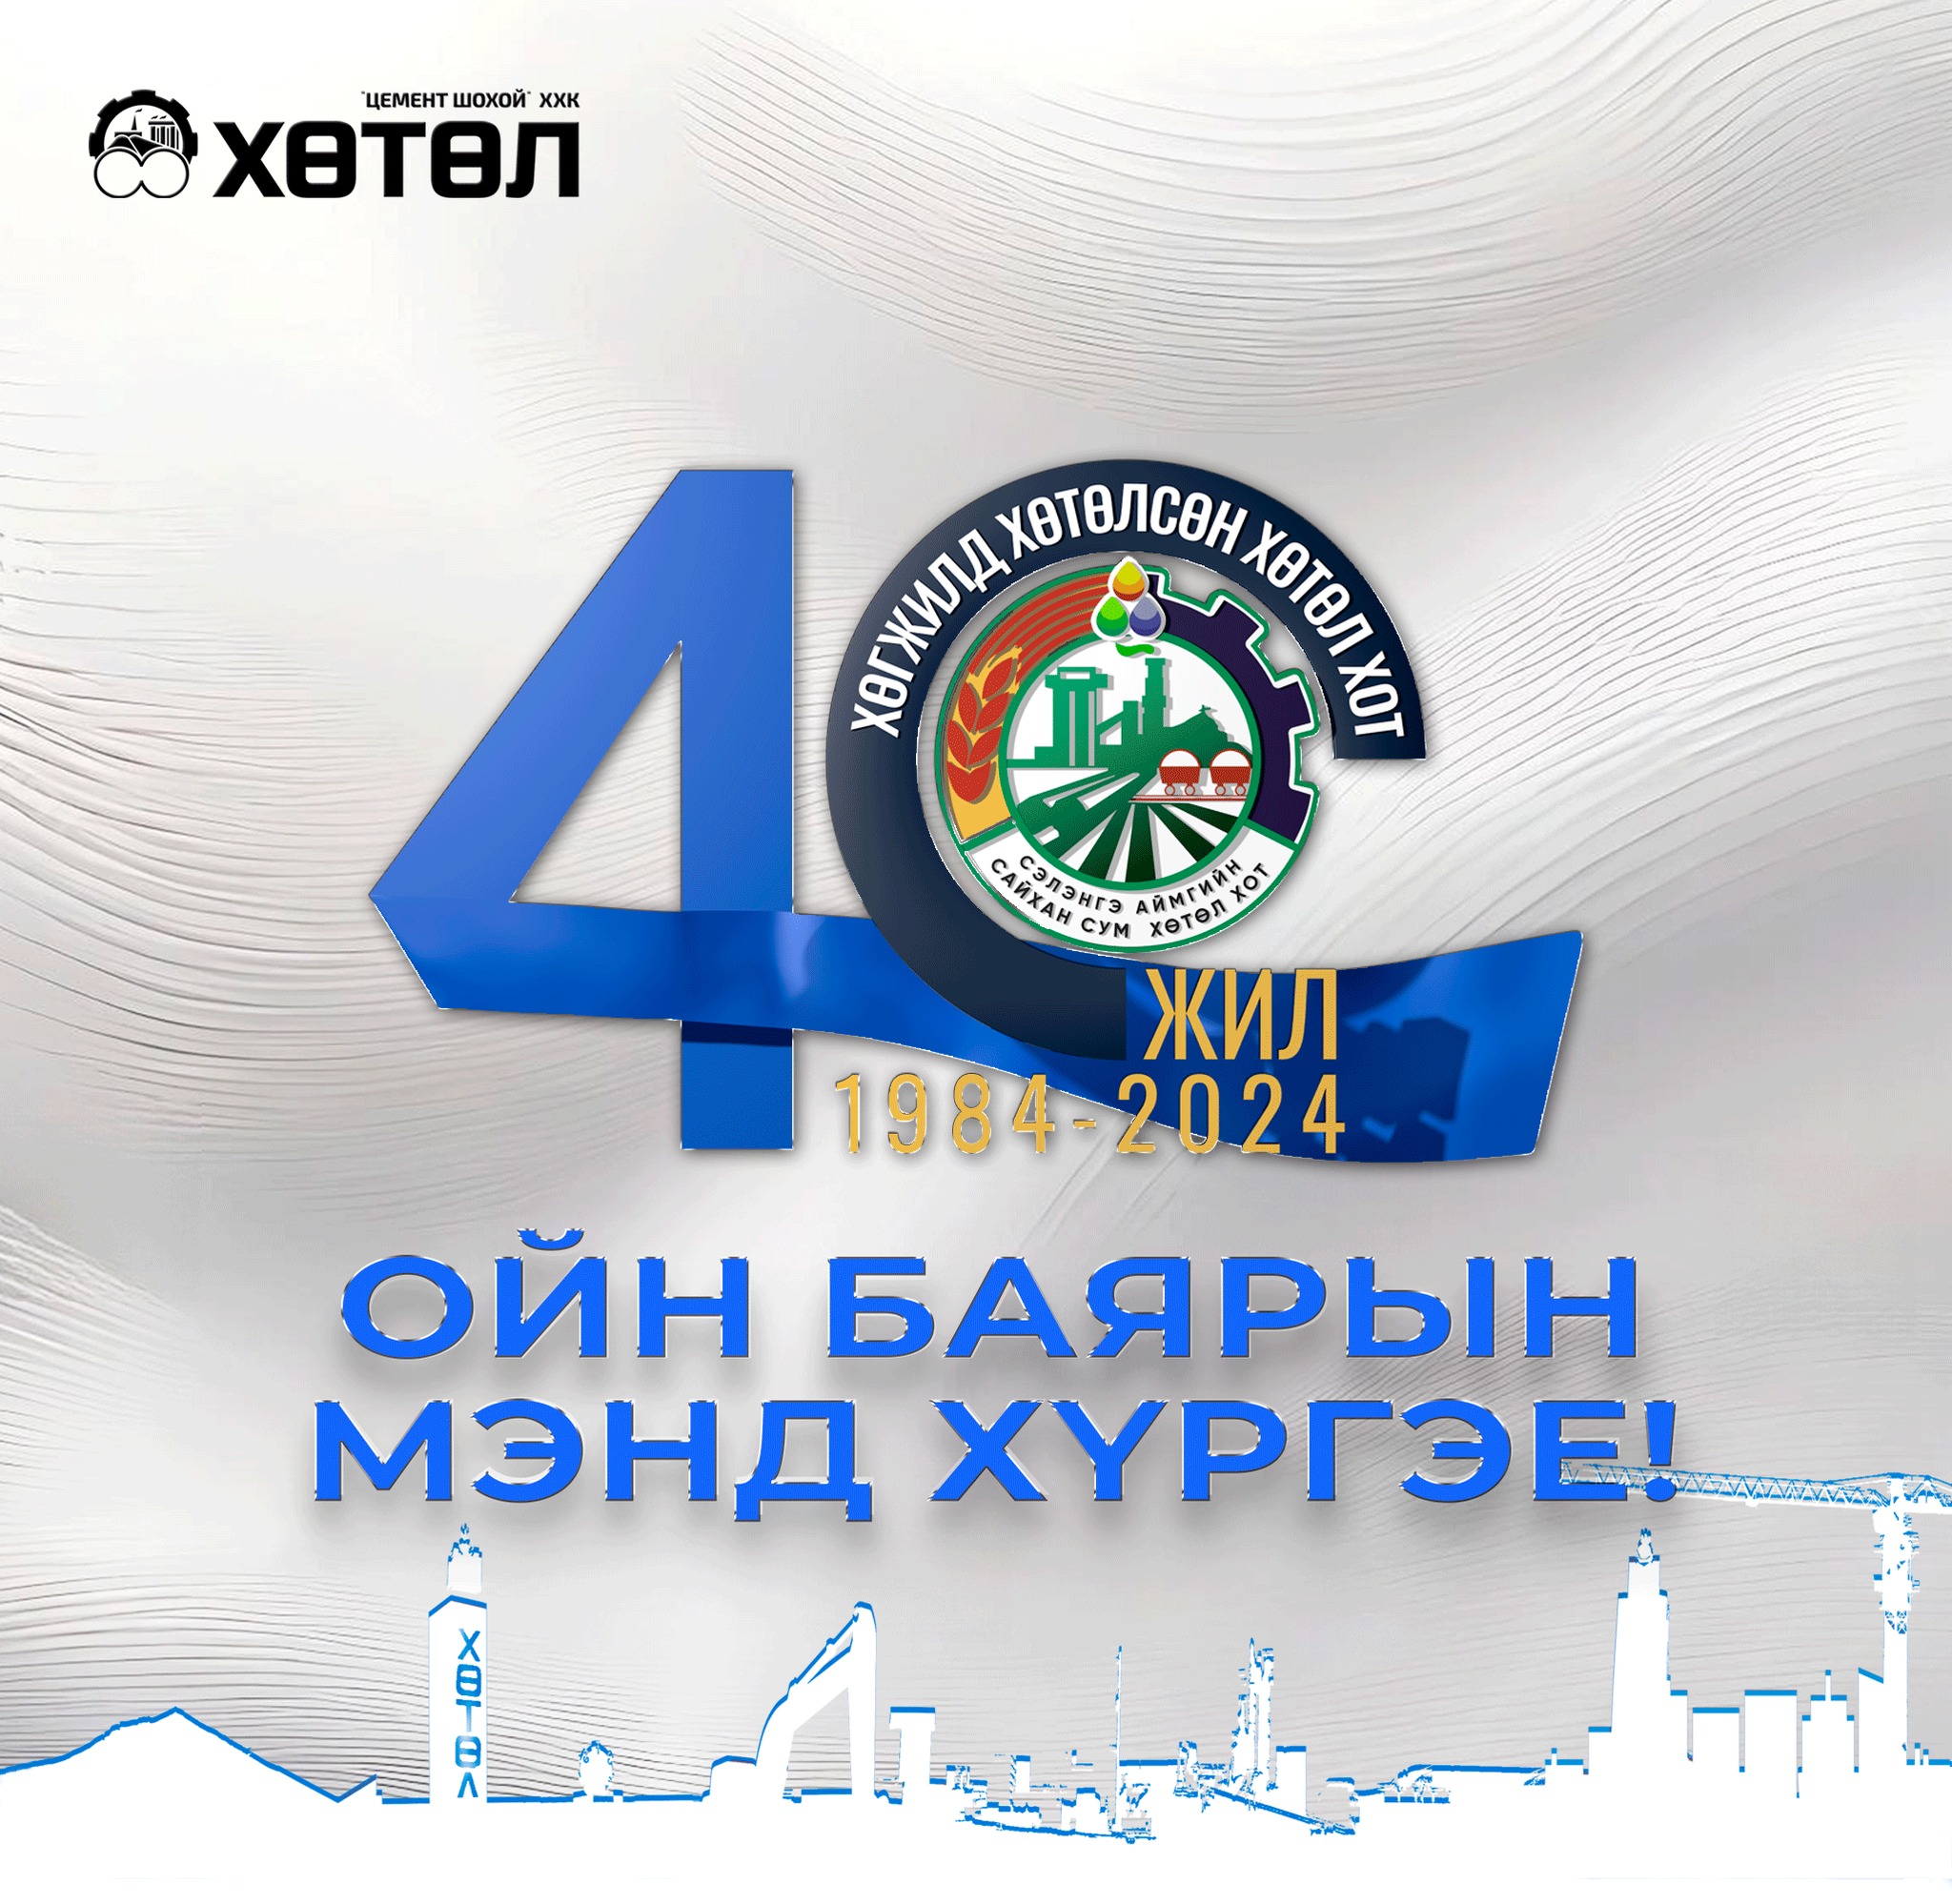 Read more about the article ХӨТӨЛ ХОТ-40 ЖИЛ